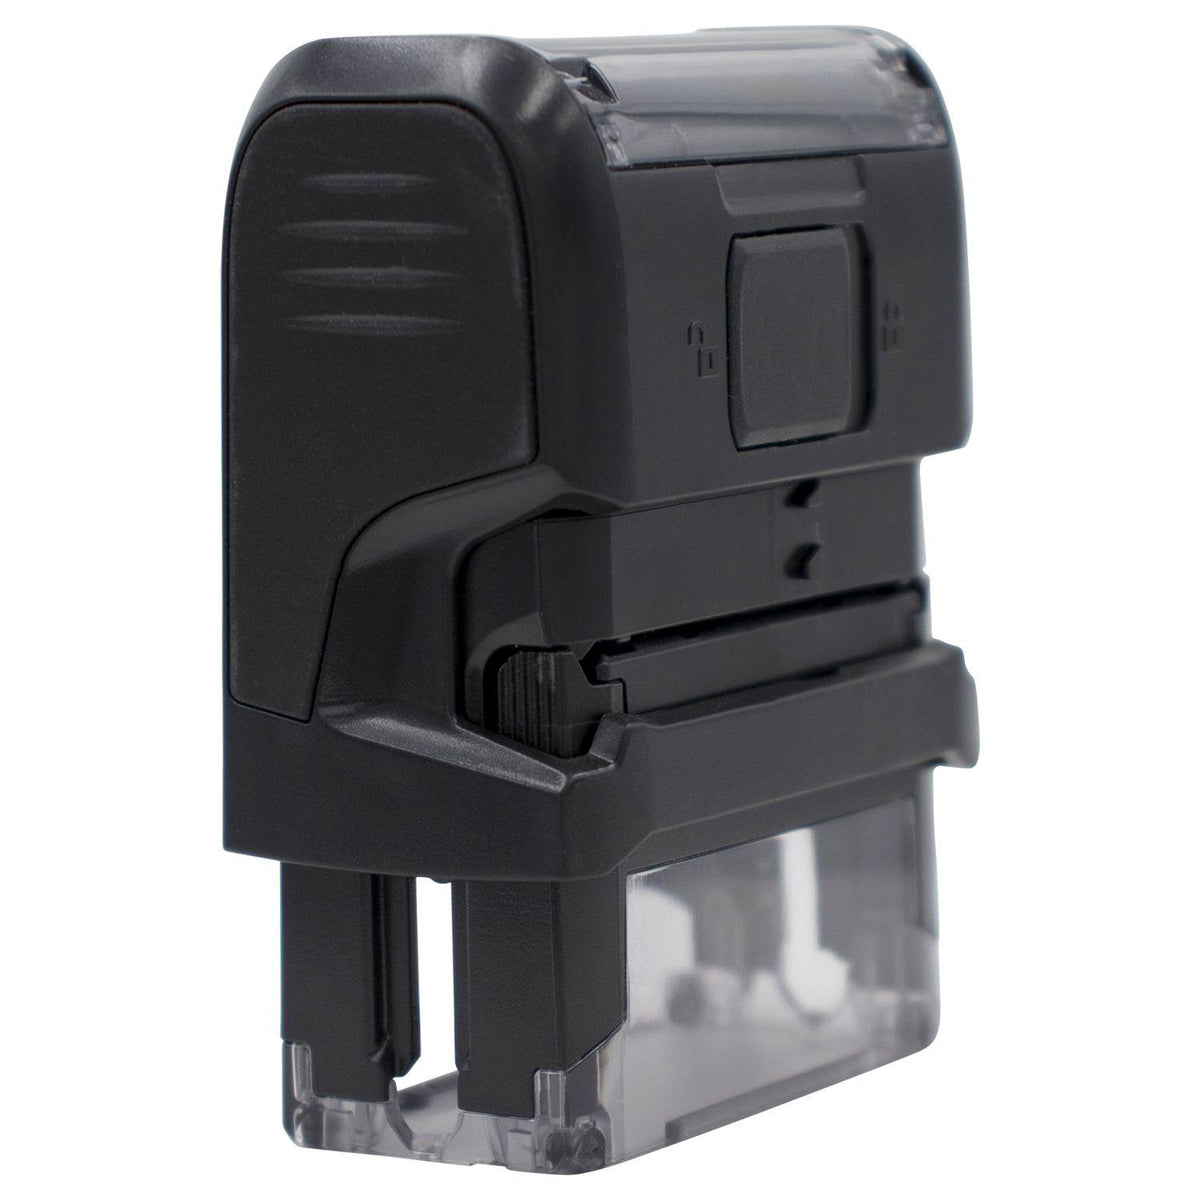 Large Self Inking Client Copy Stamp Back View